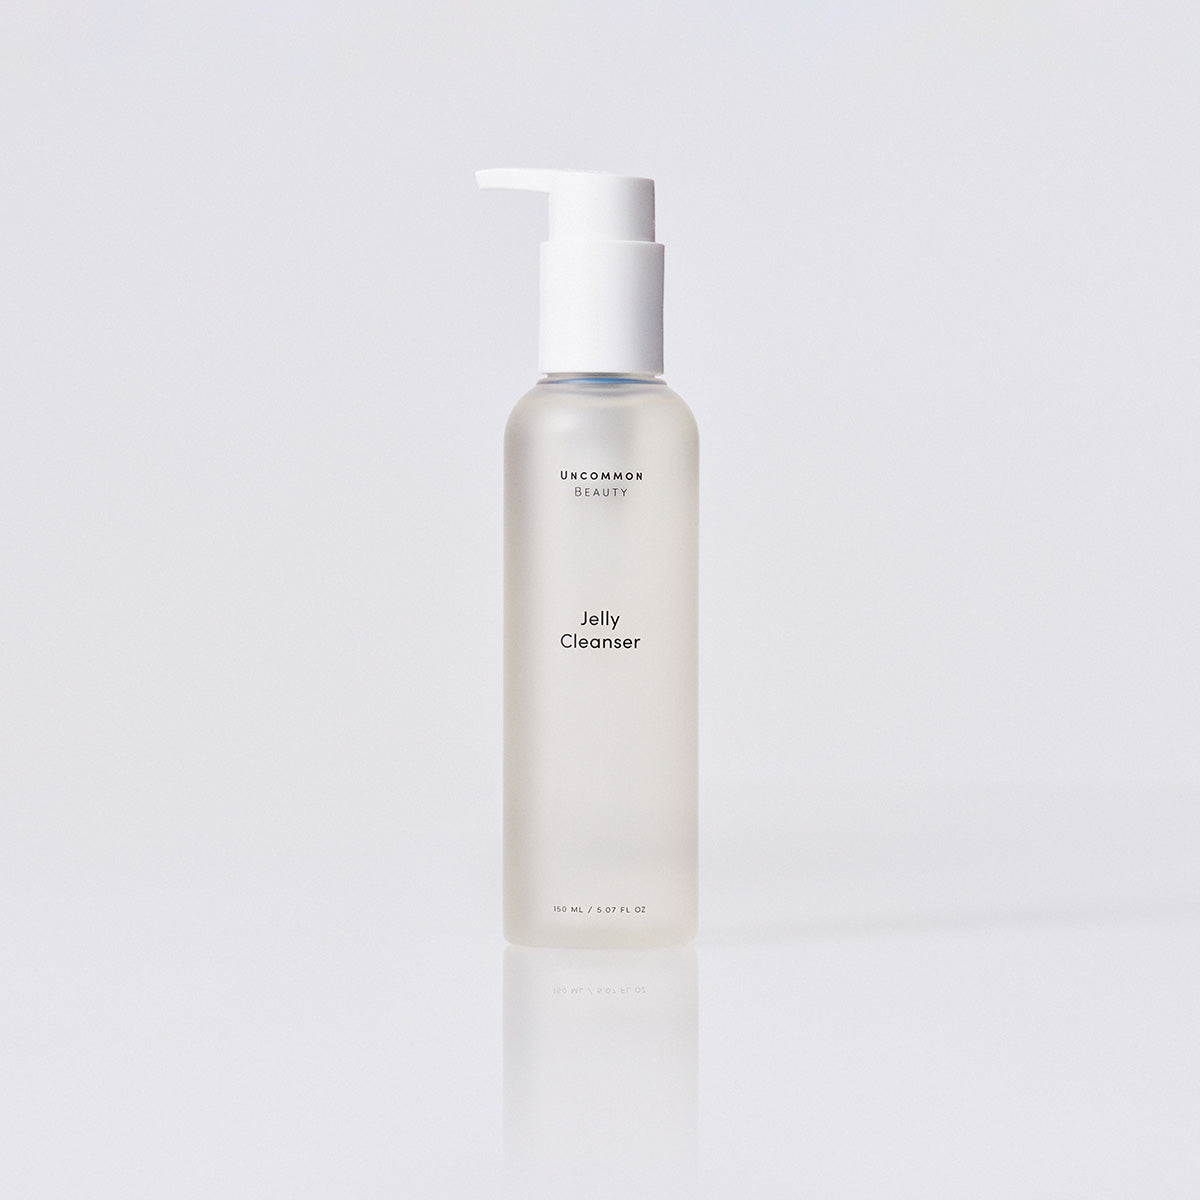 Jelly Cleanser | Product Image | Uncommon Beauty